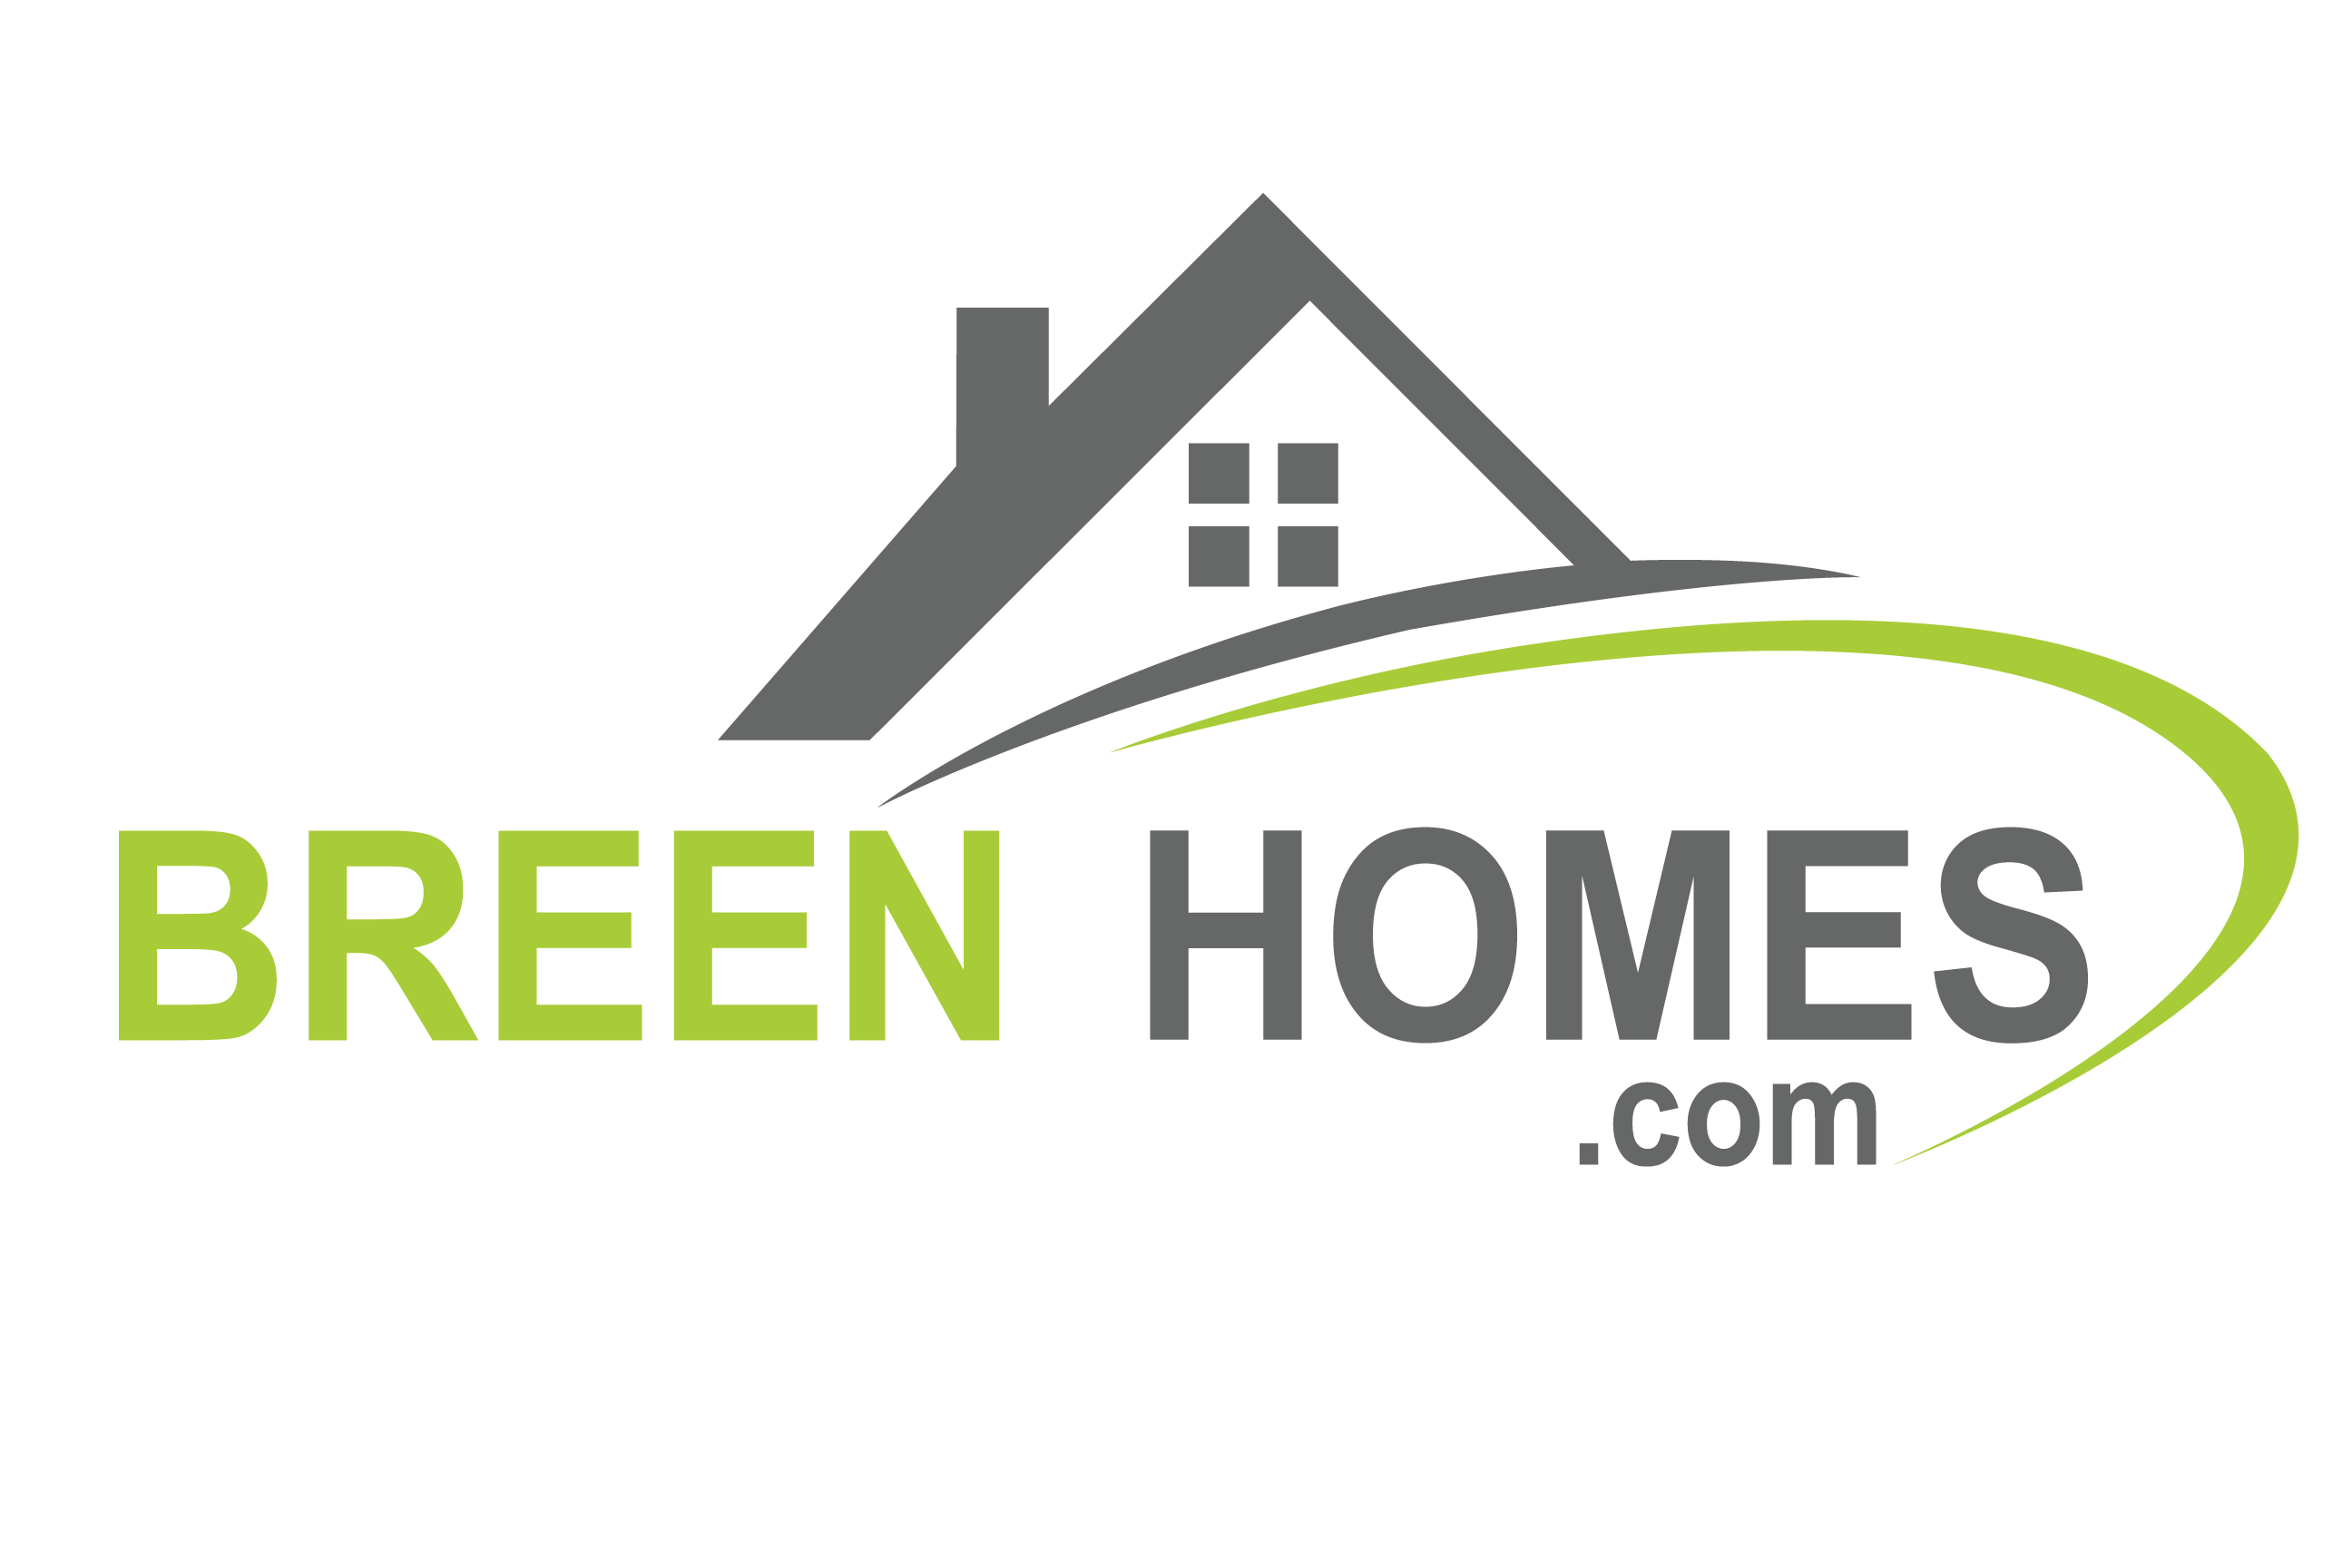 Breen Homes, Inc. - Service Online Solution